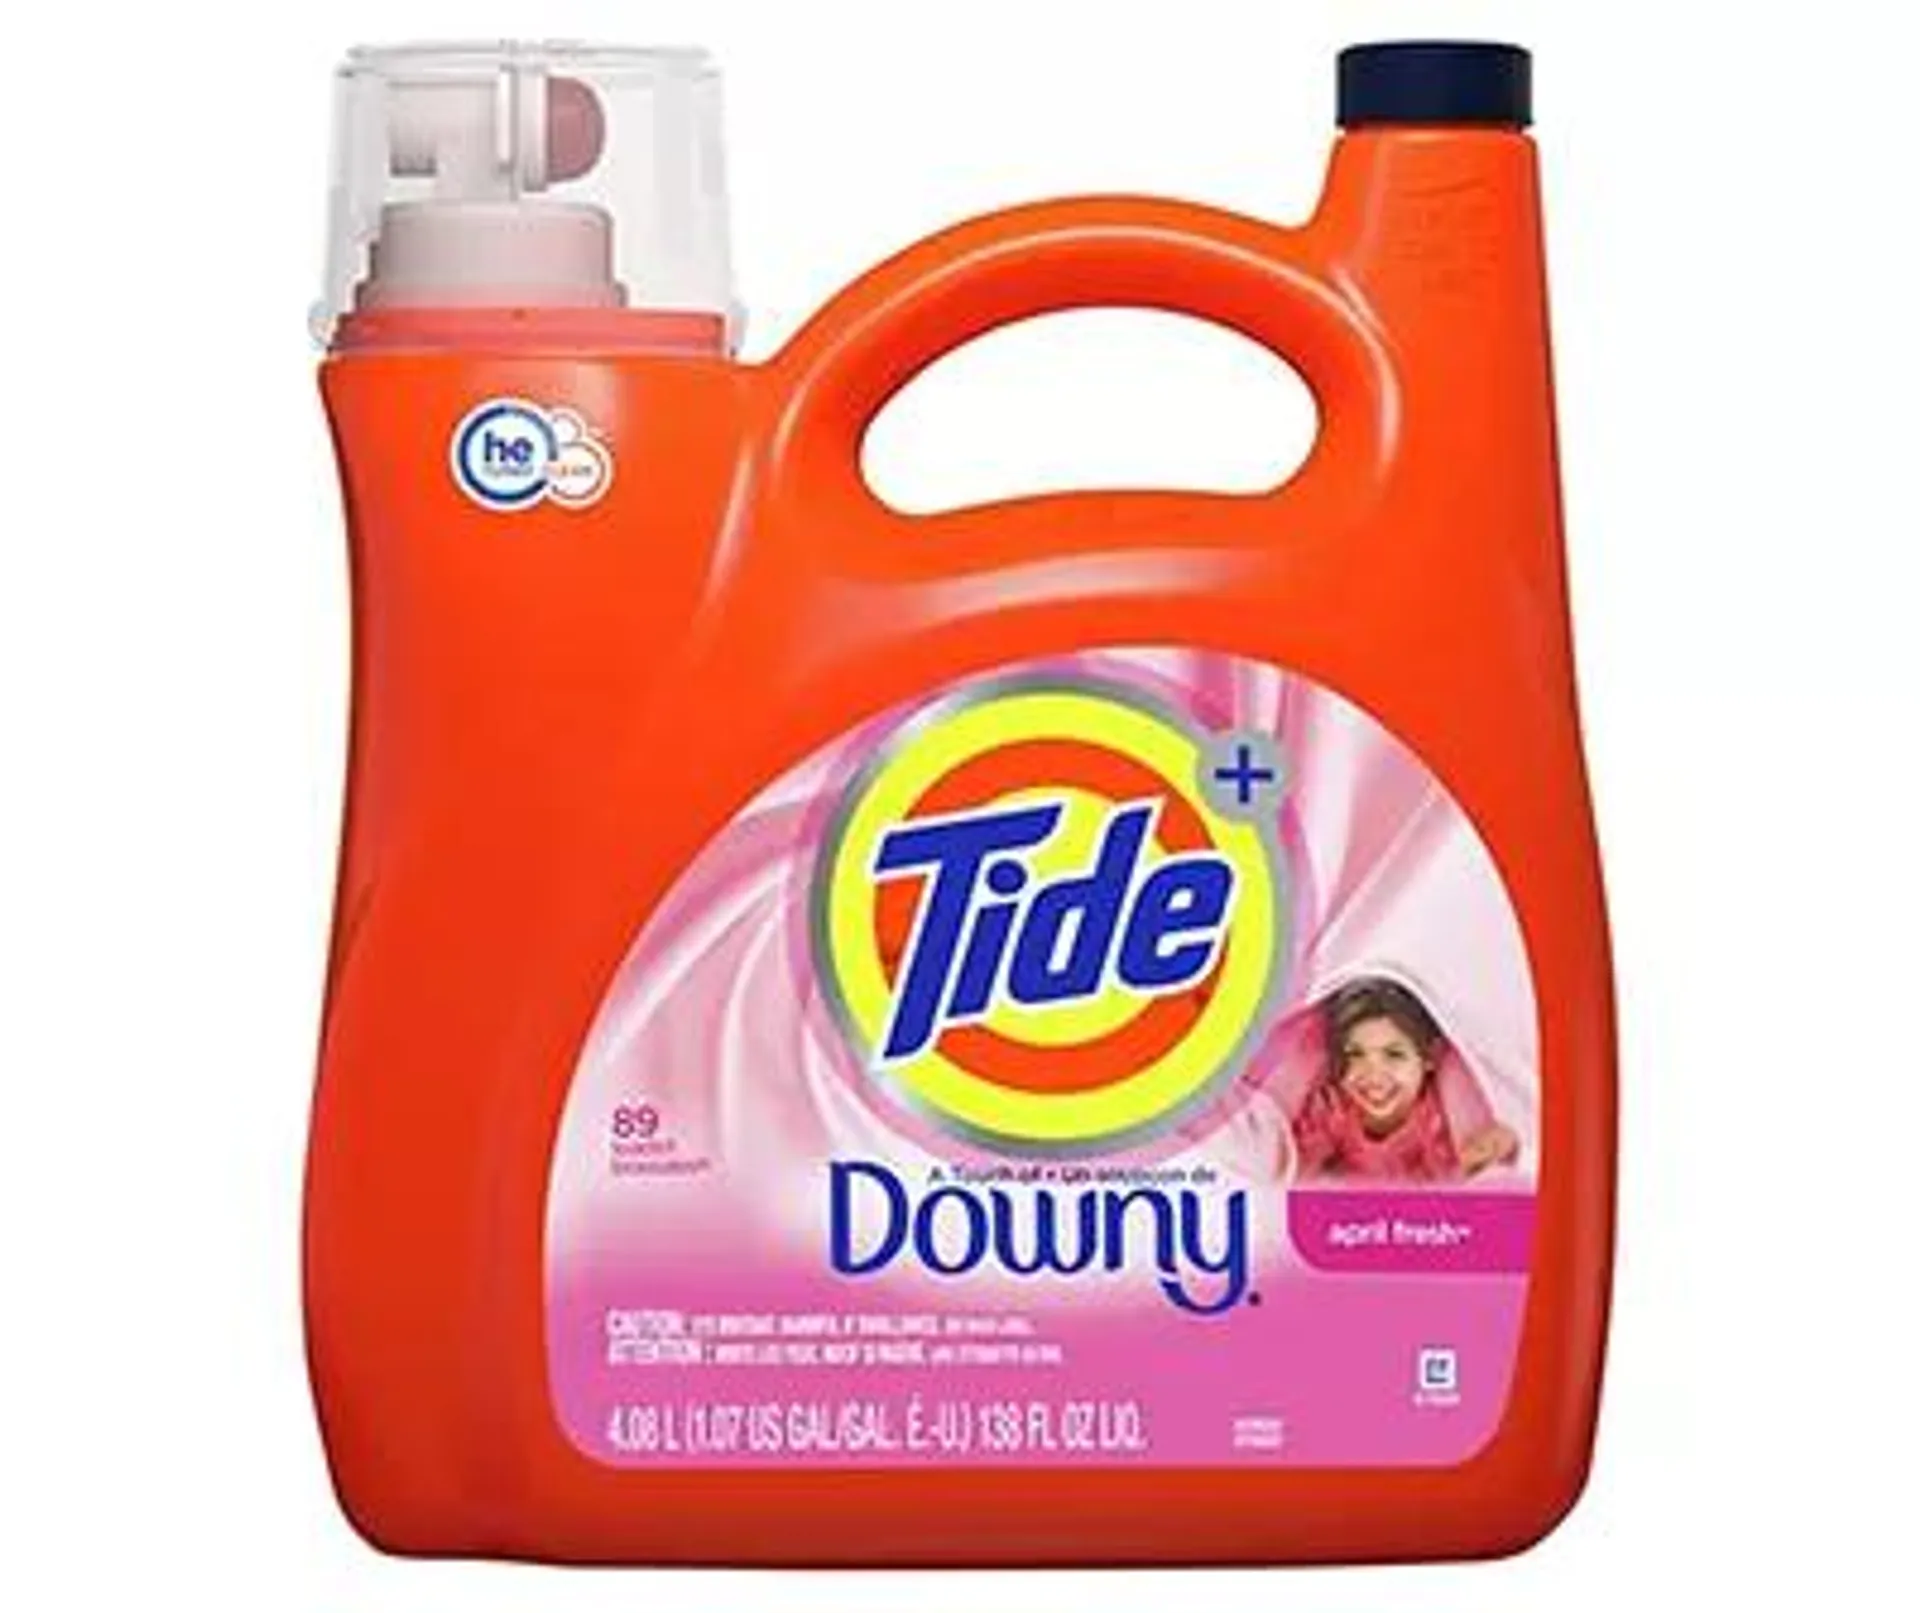 Tide Liquid Laundry Detergent with a Touch of Downy, April Fresh, 89 load,s 138 fl oz, HE Compatible